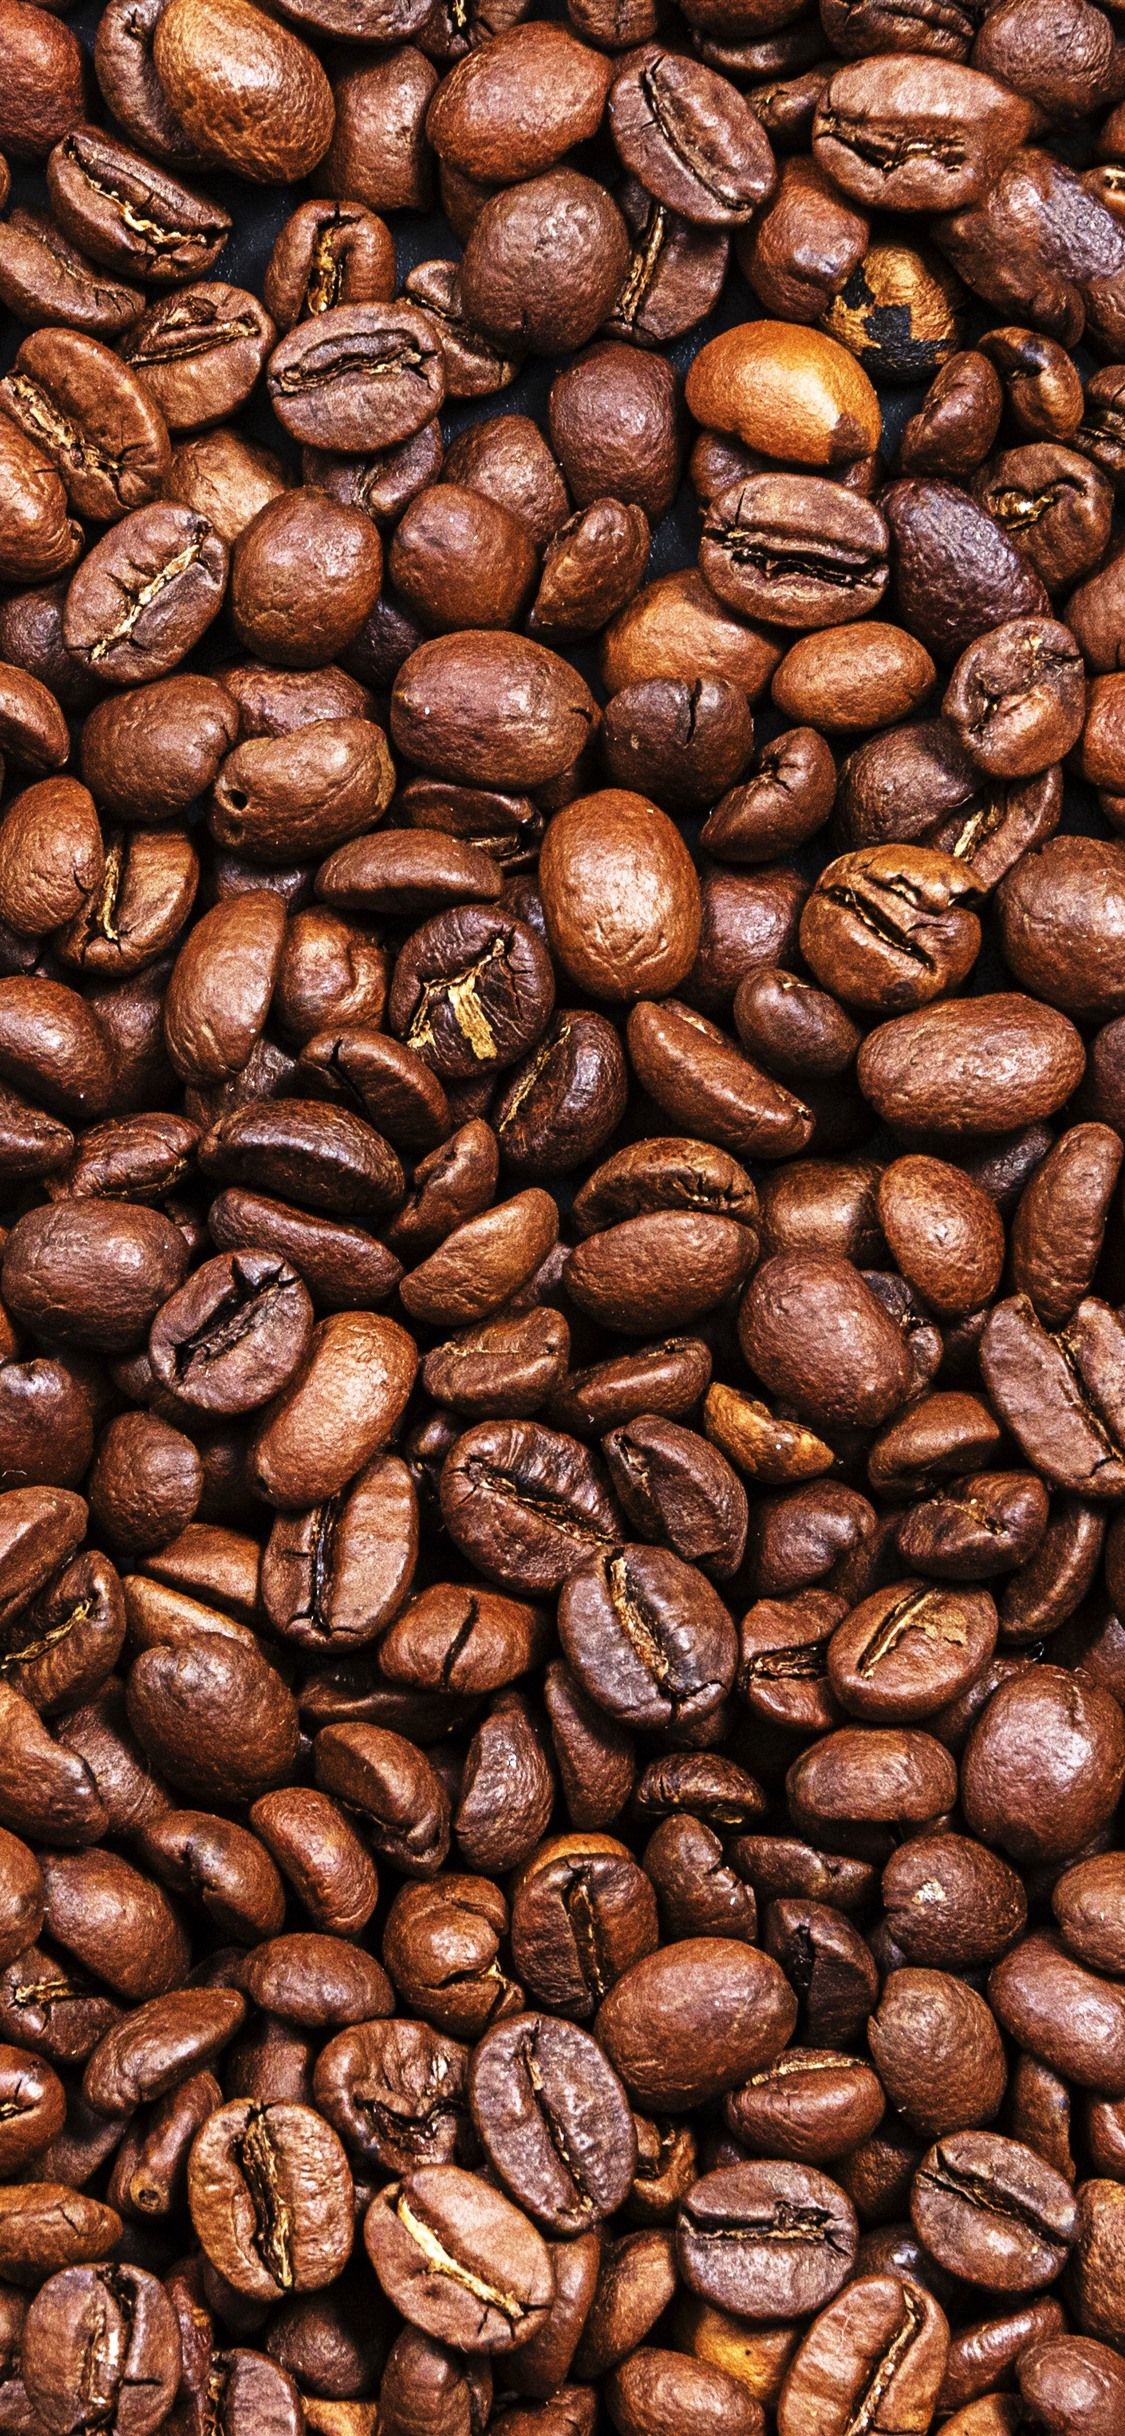 Coffee Iphone Wallpapers